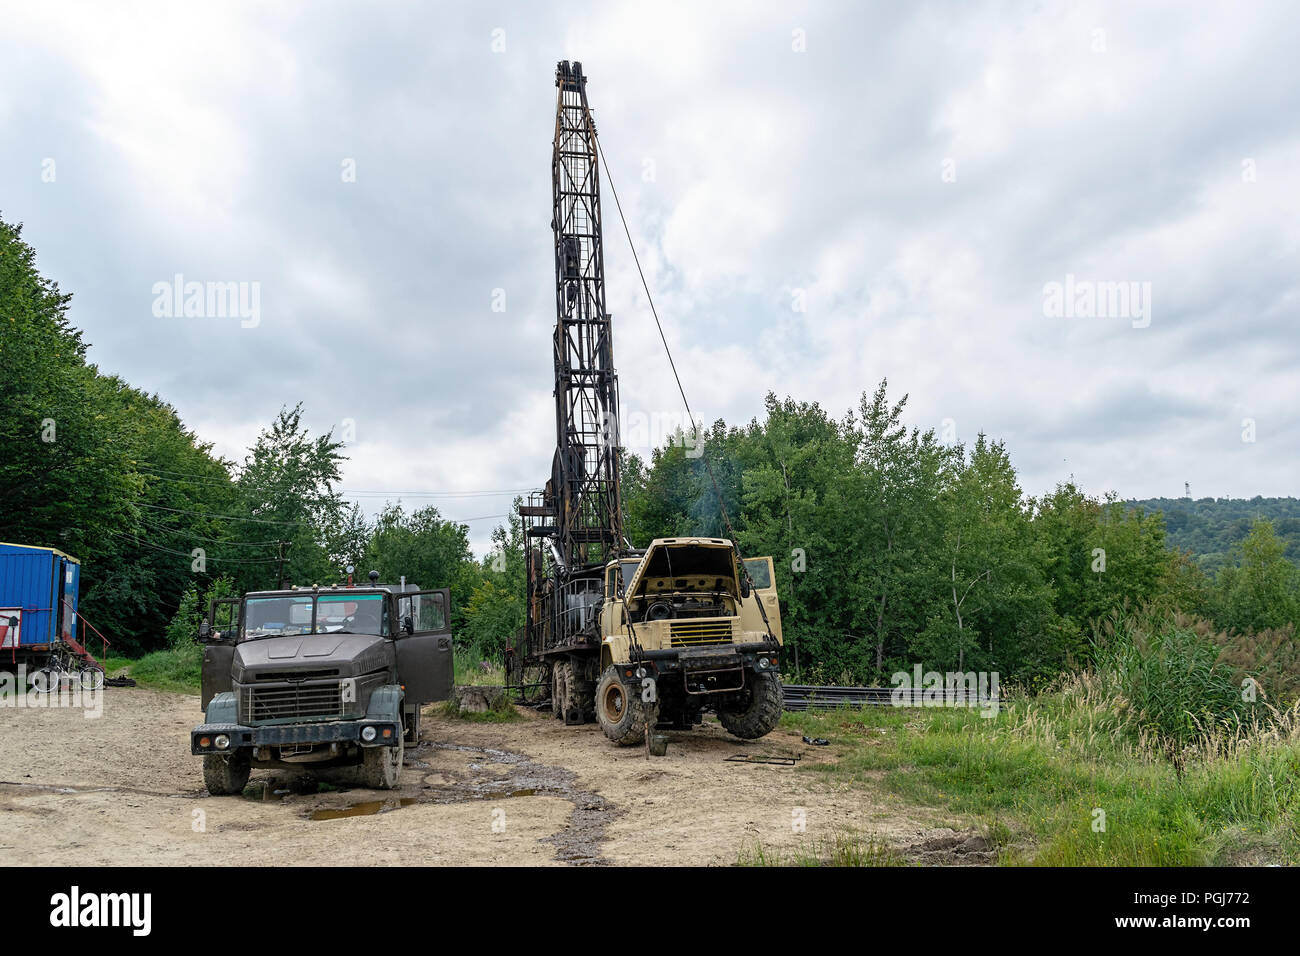 Mobile oil rig truck drilling the oil well Stock Photo